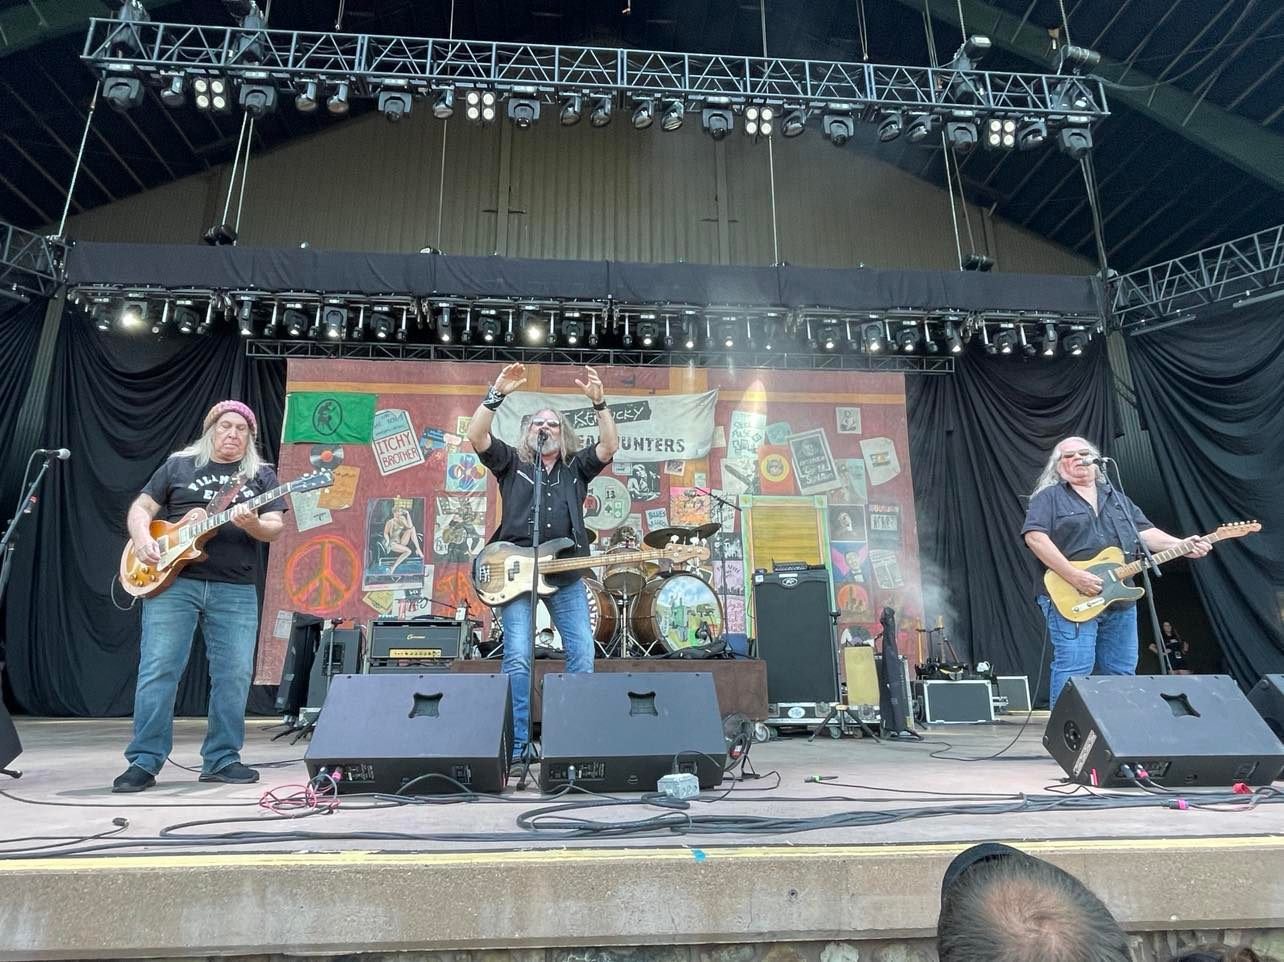 Right, Pictured are Greg Martin (left), Cardwell, Mo’s Doug Phelps (center), Richard Young (right) and brother Fred Young (drums) of The Kentucky Headhunters. The band played ample hits, including my request “My Daddy Was a Milkman”.